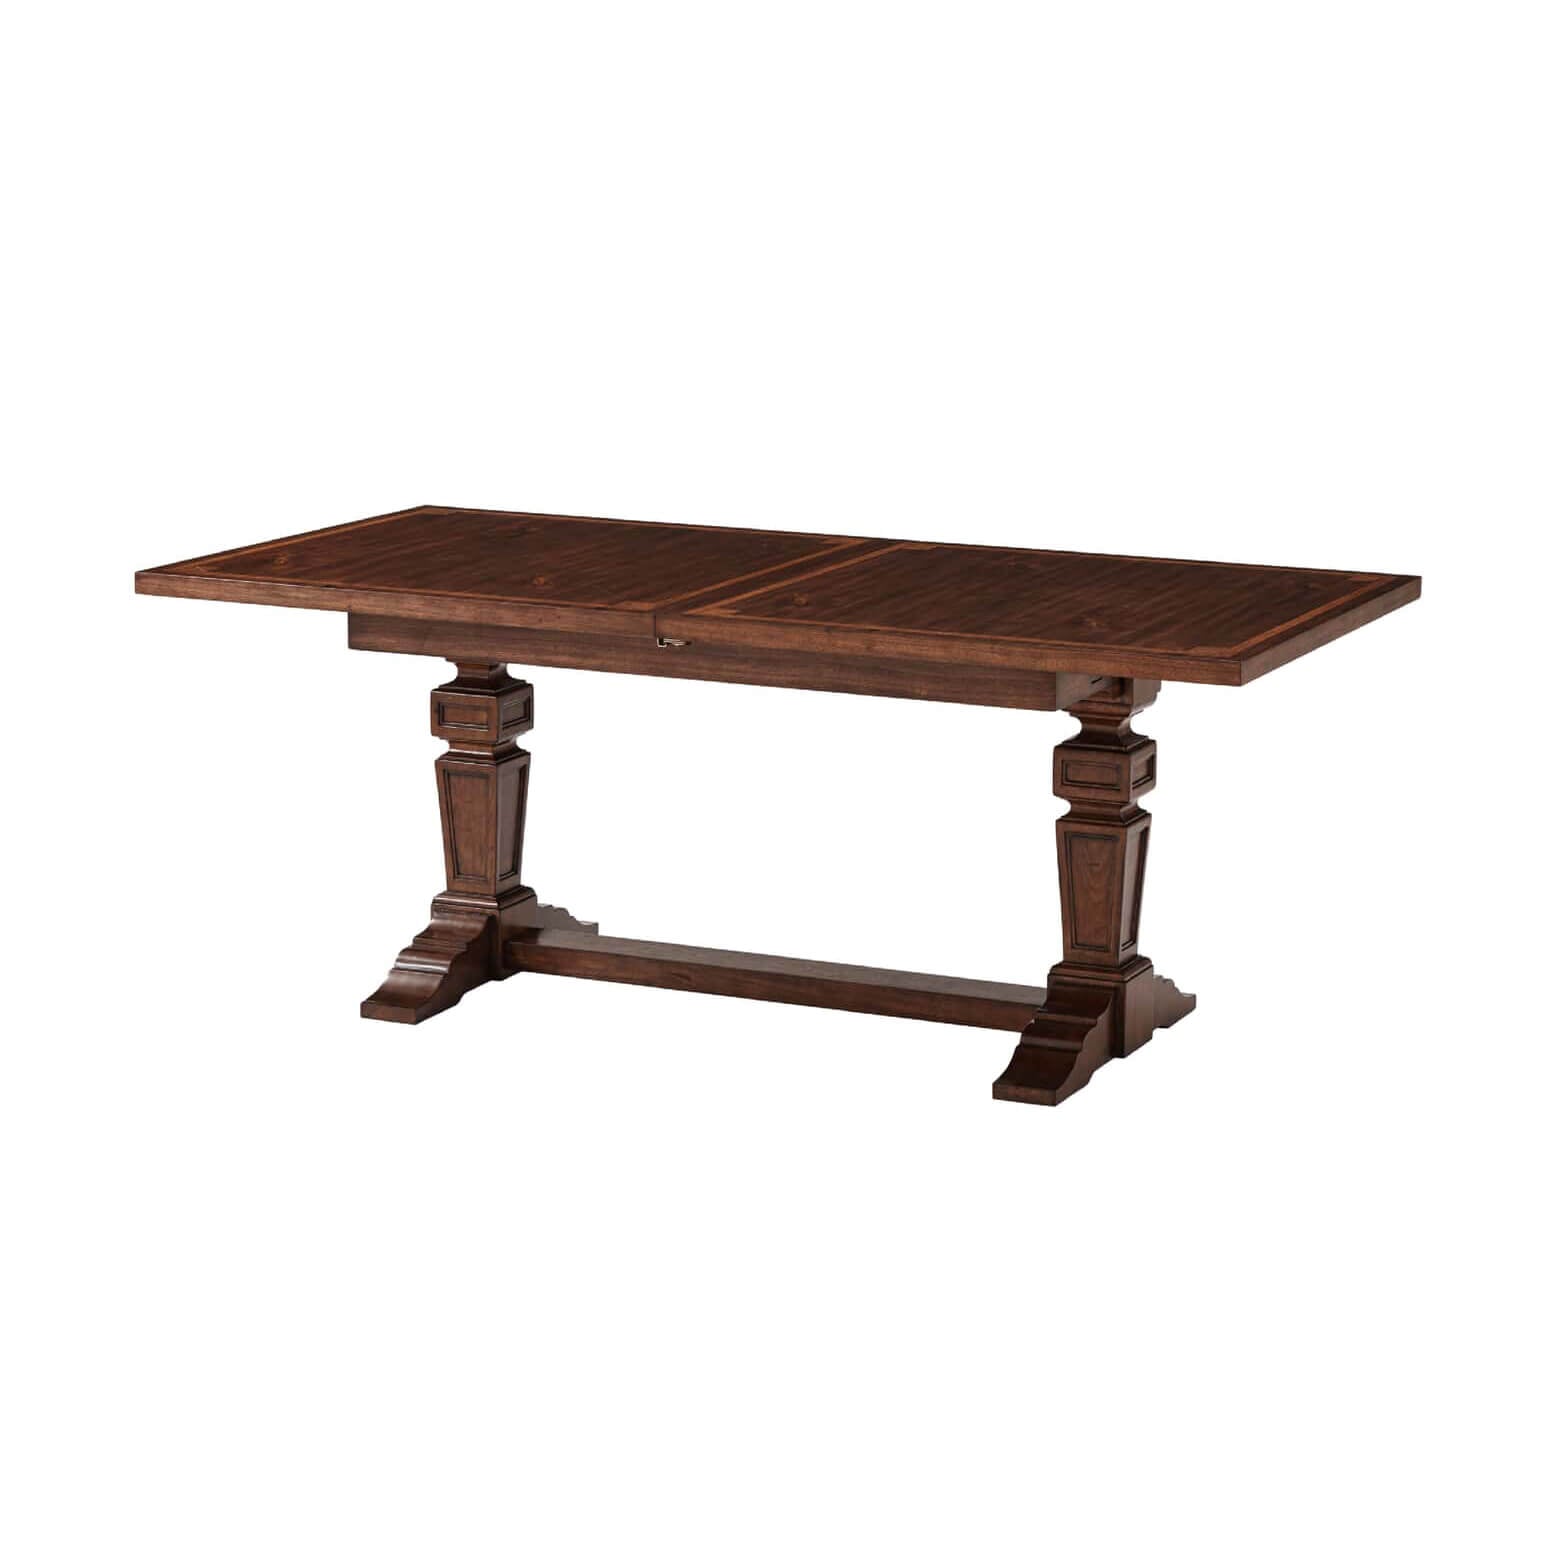 Provincial Neo Classic Extension Dining Table - English Georgian America